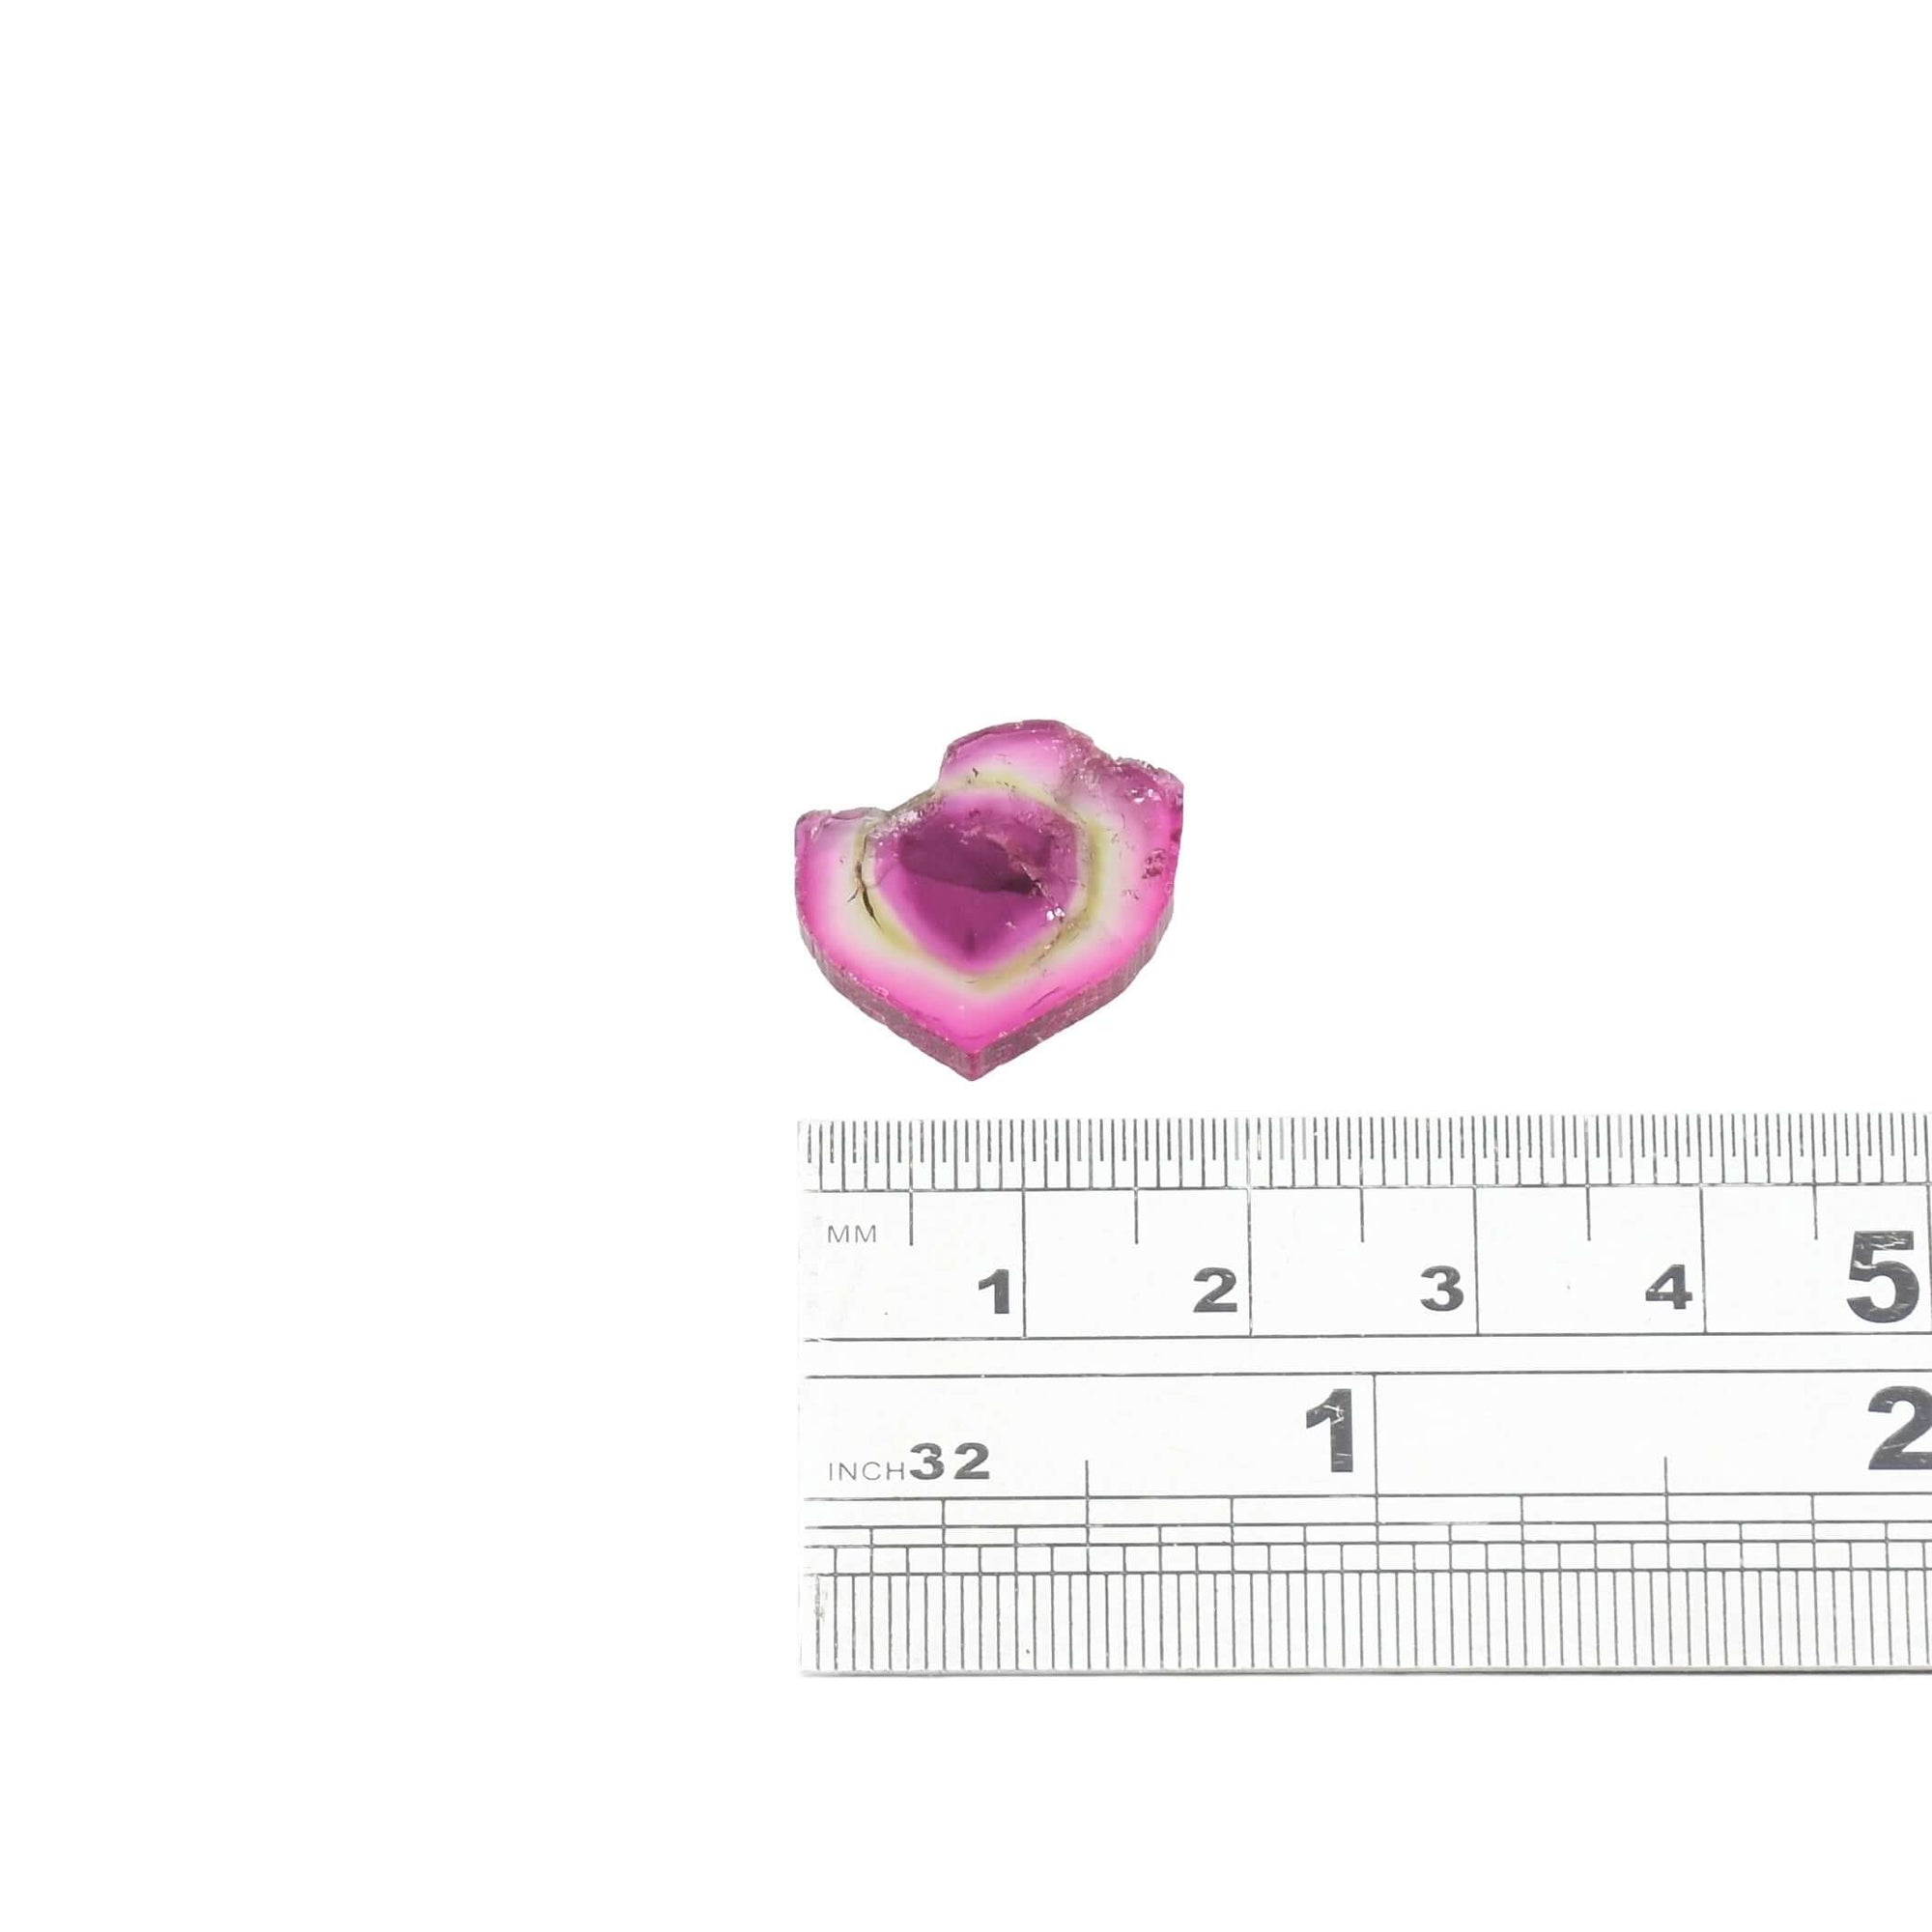 This gorgeous pink watermelon tourmaline slice is perfect for a custom watermelon tourmaline ring.